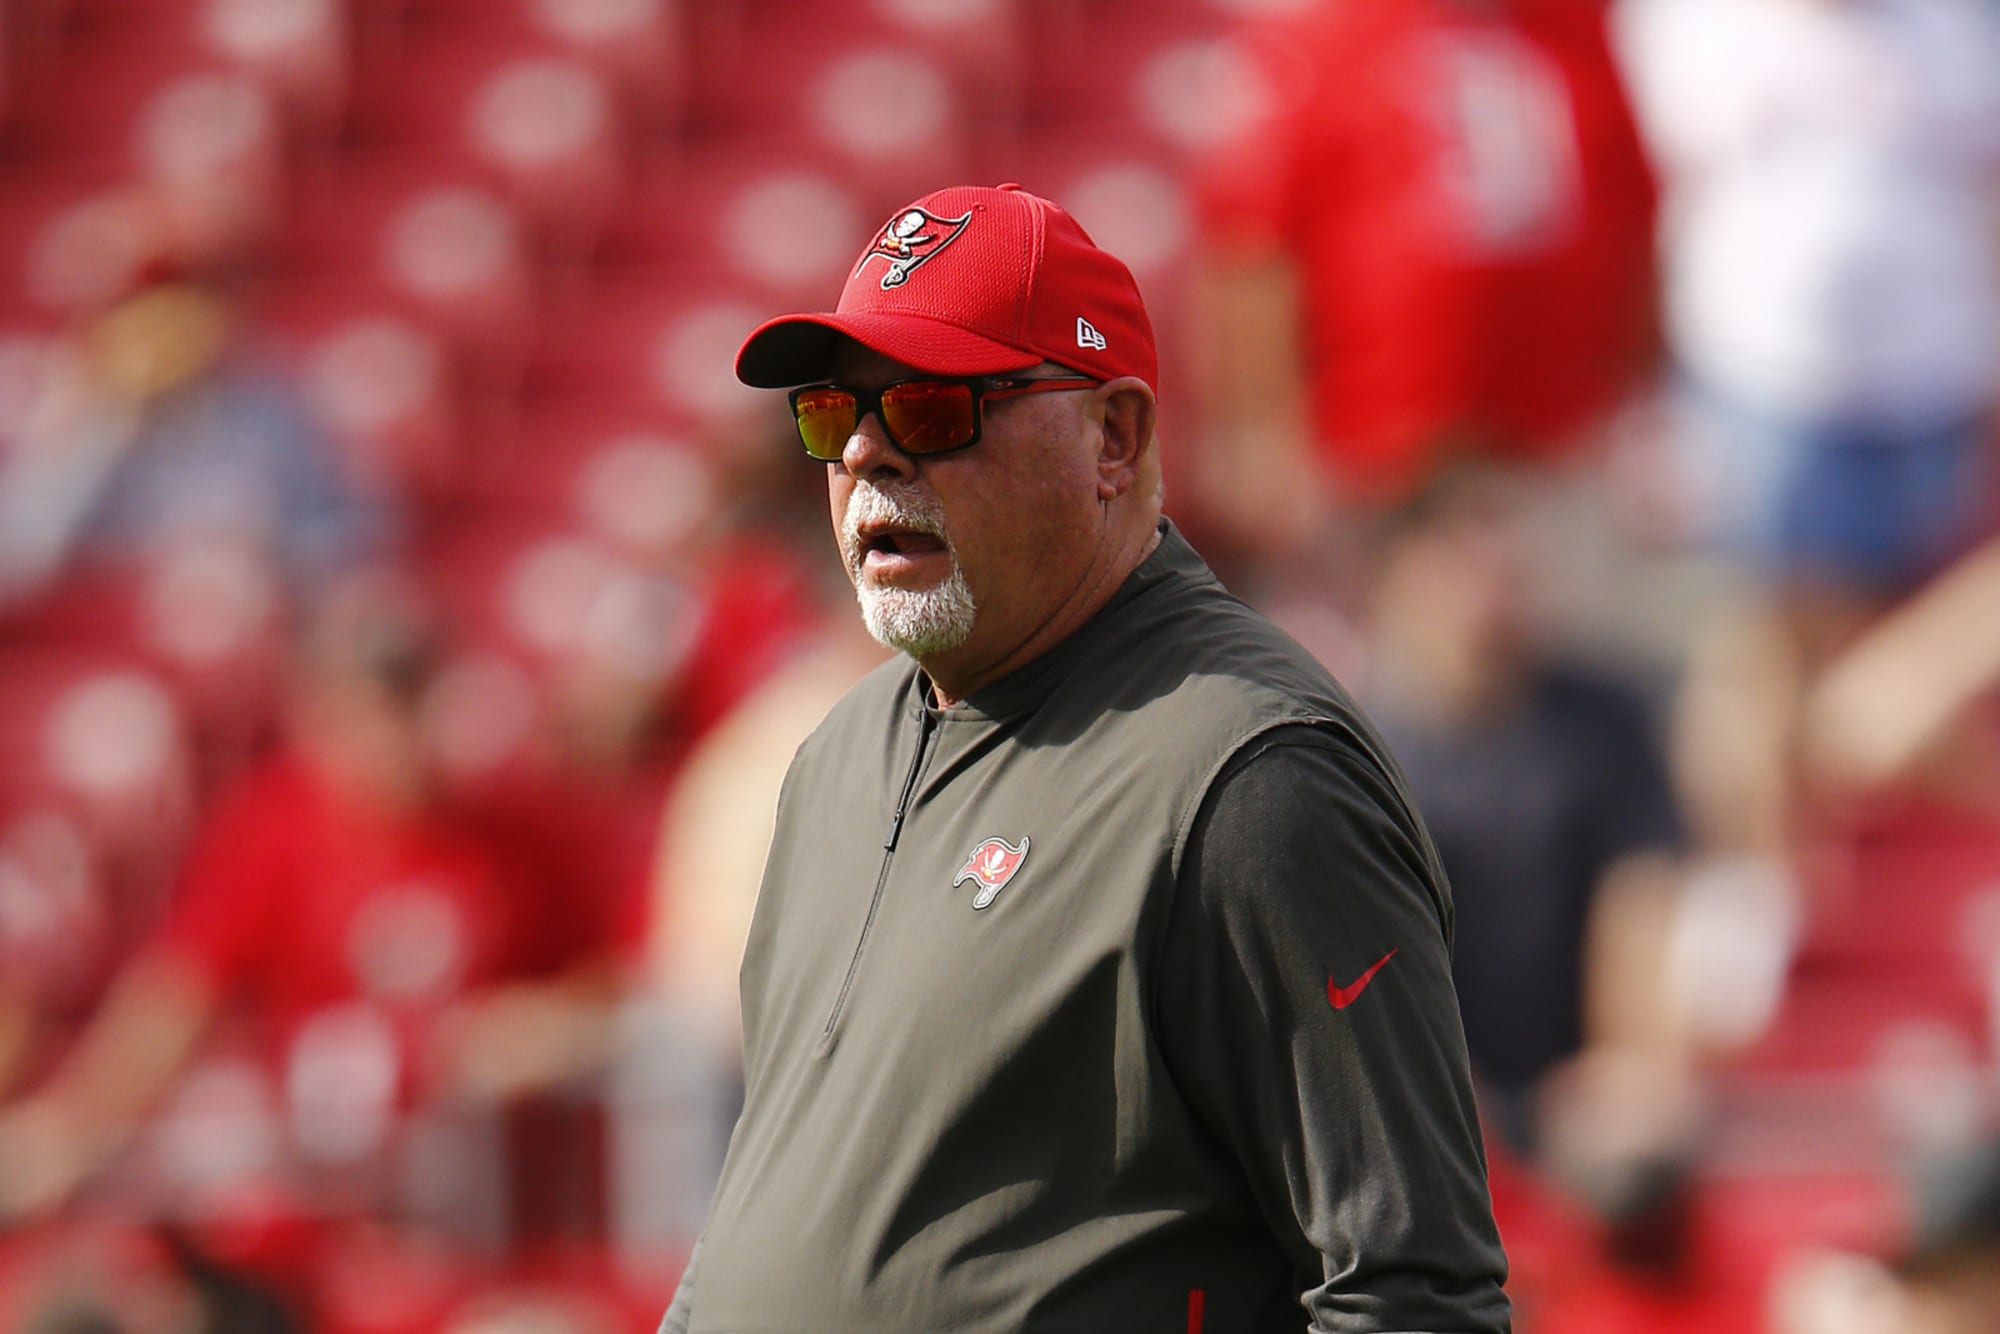 Buccaneers Espn Analyst Bruce Arians Is Wasting Tom Brady Page 2